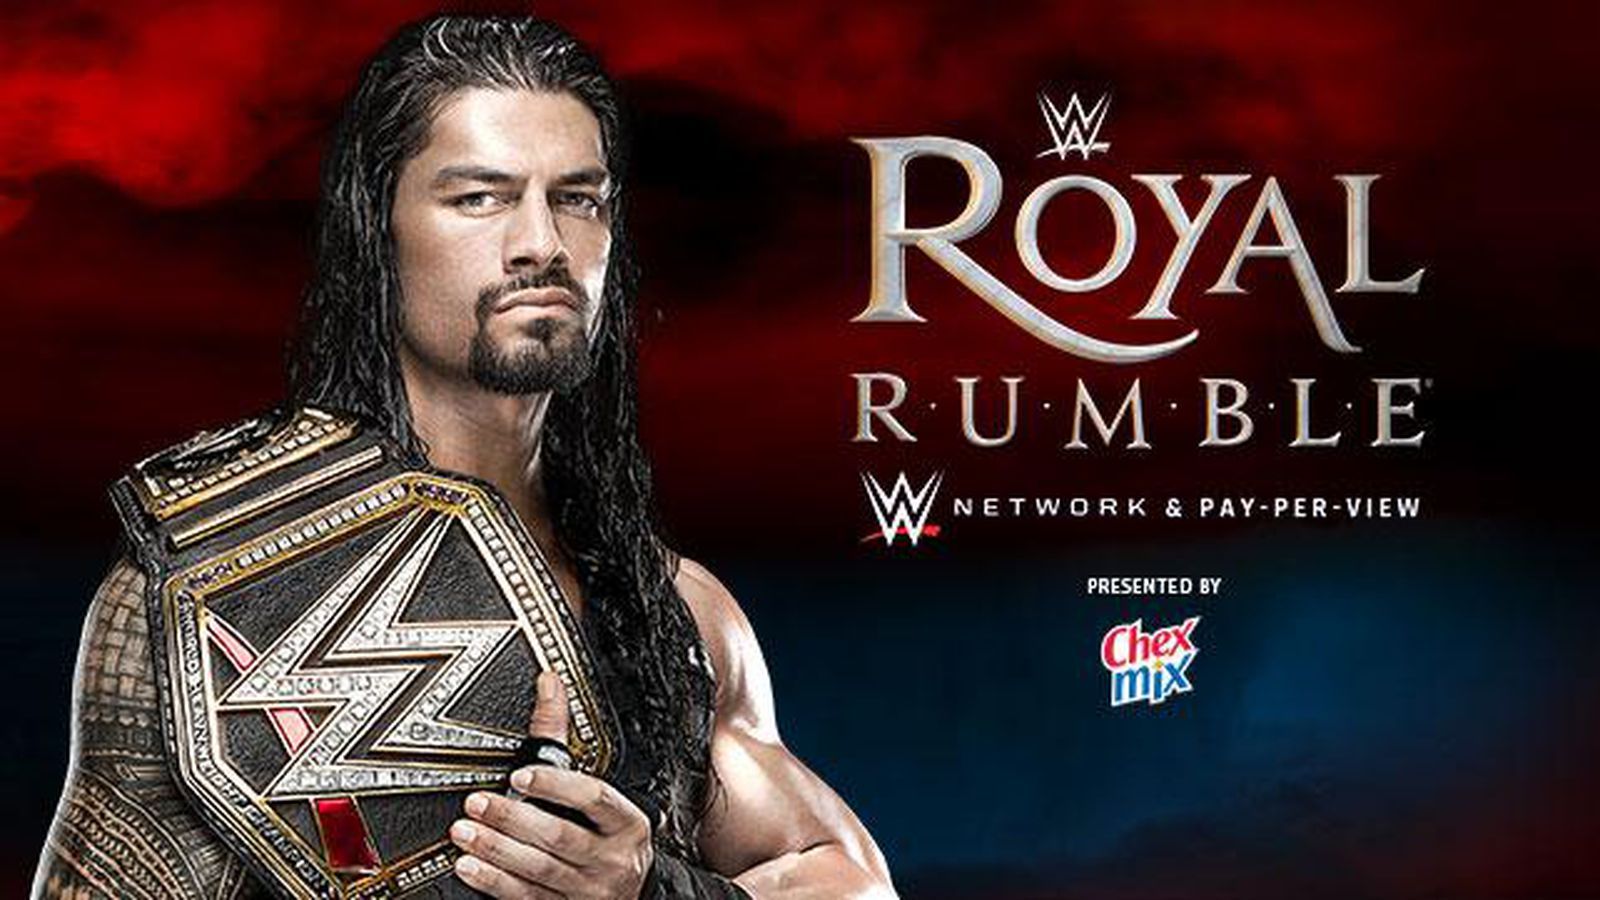 WWE Royal Rumble 2016 match card preview: The Royal Rumble Match